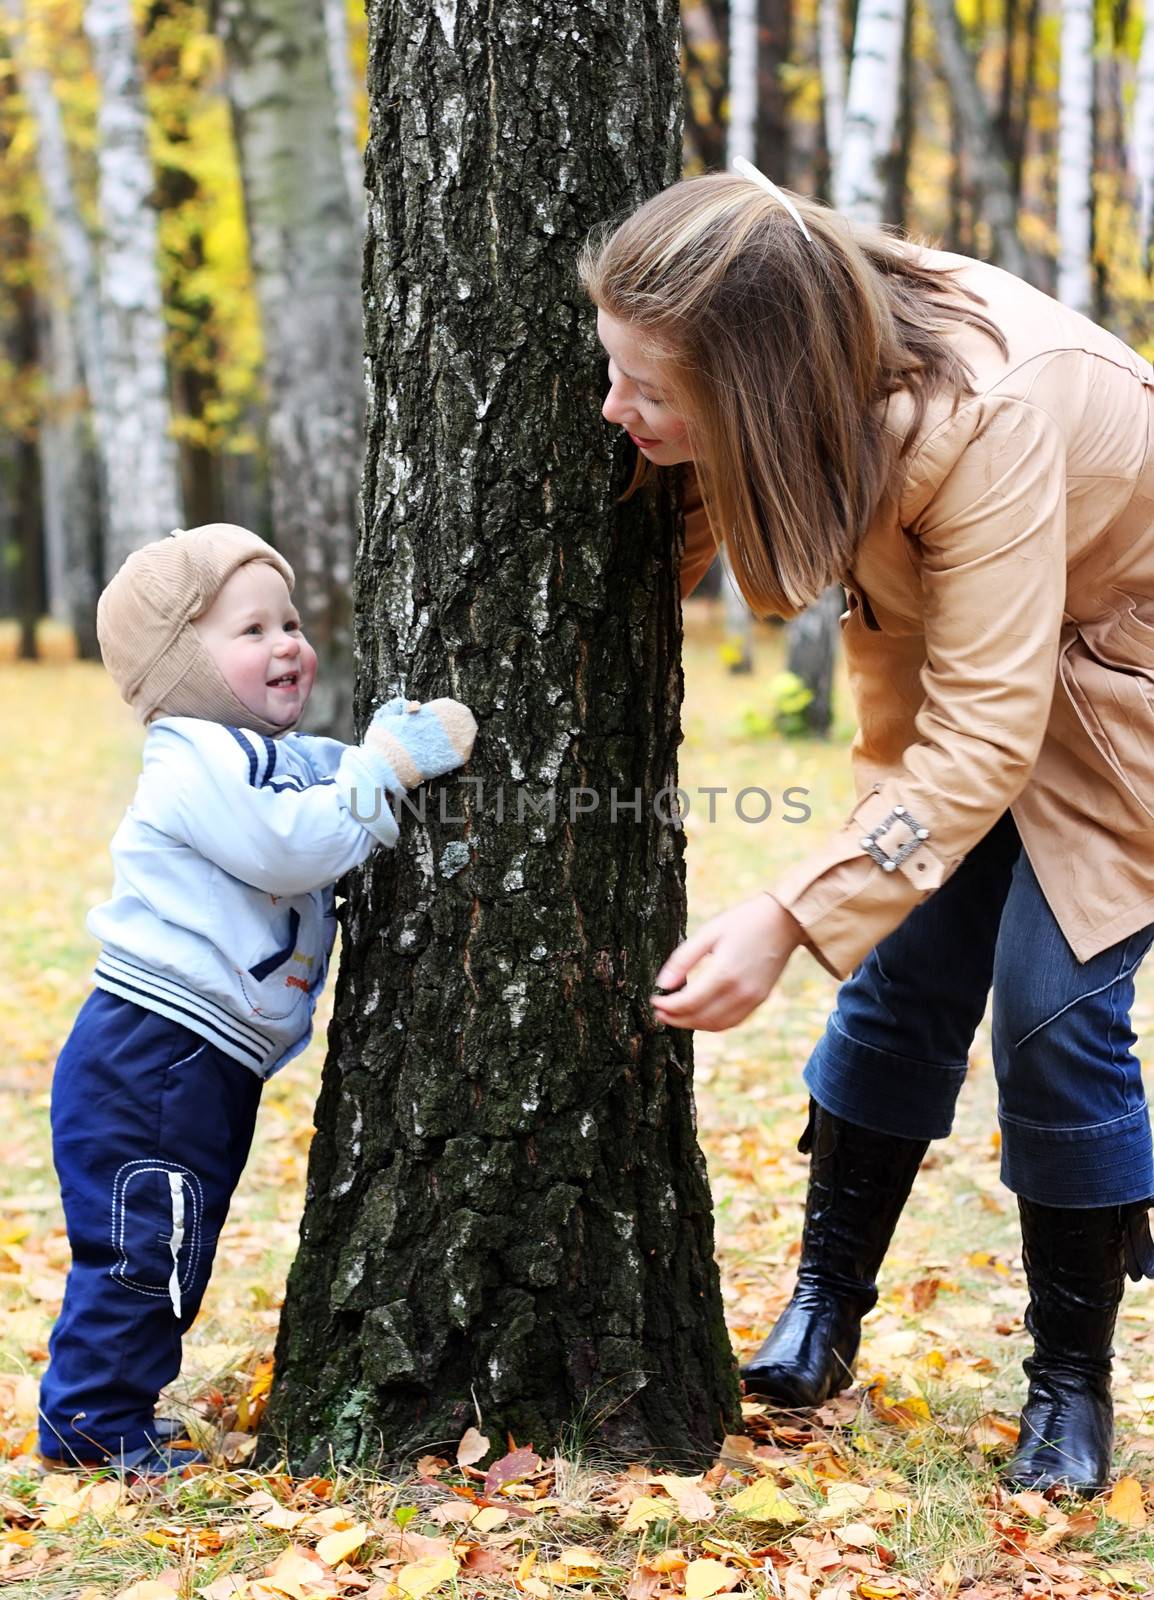 Mother and son play hide-and-seek in a park